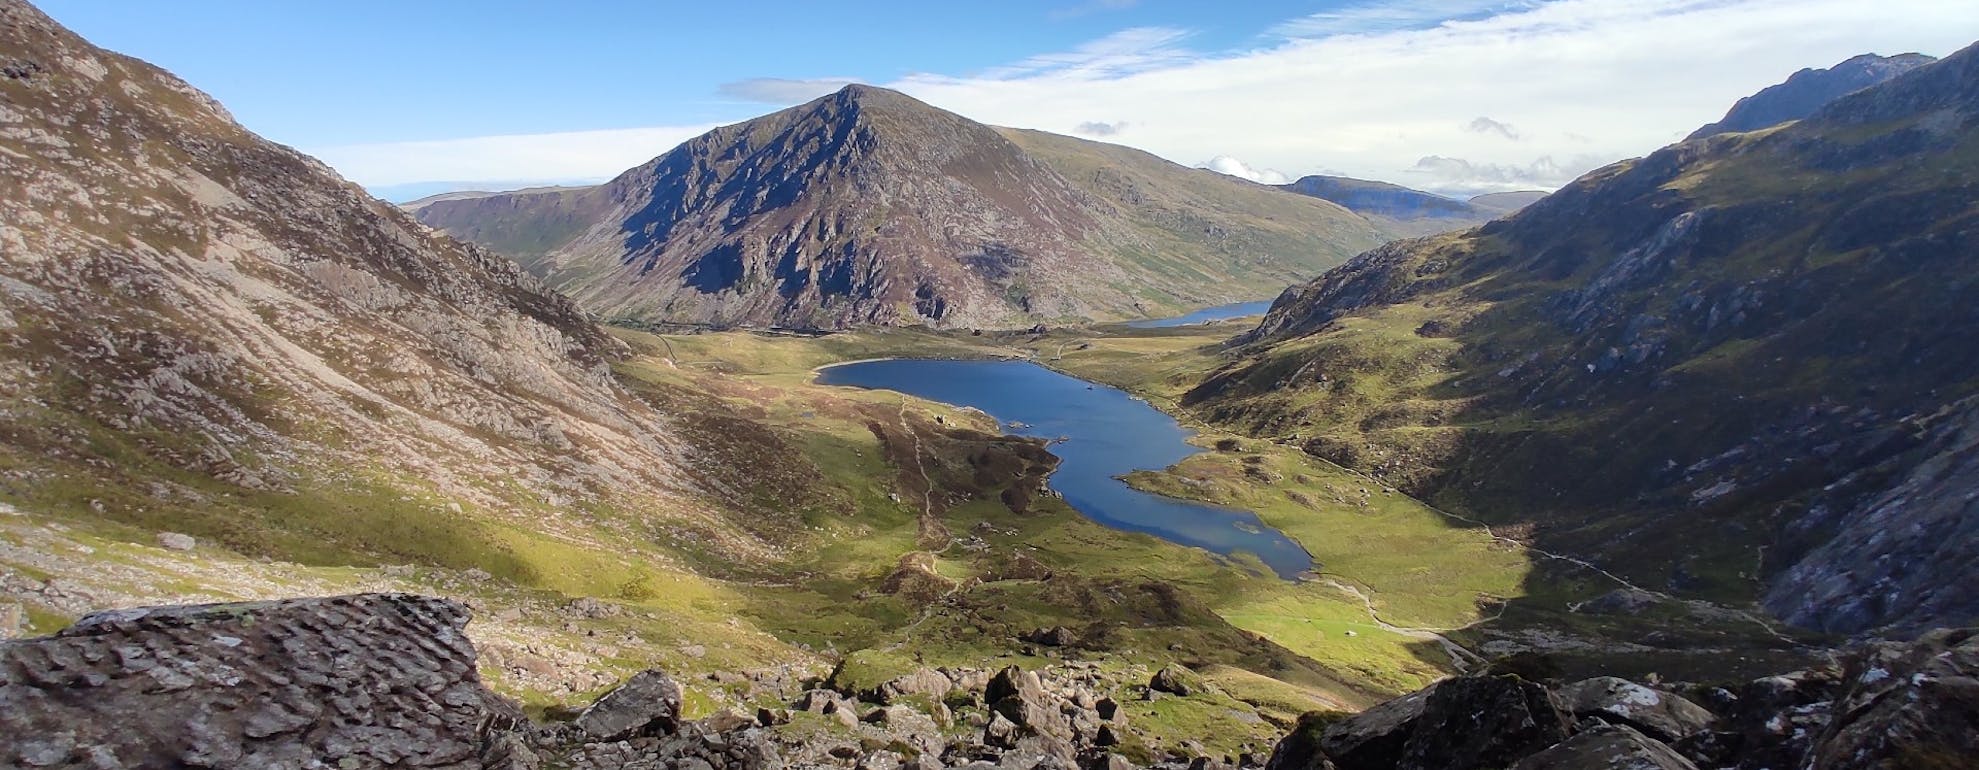 6 of the Best Hikes and Runs in Snowdonia by Hero Douglas